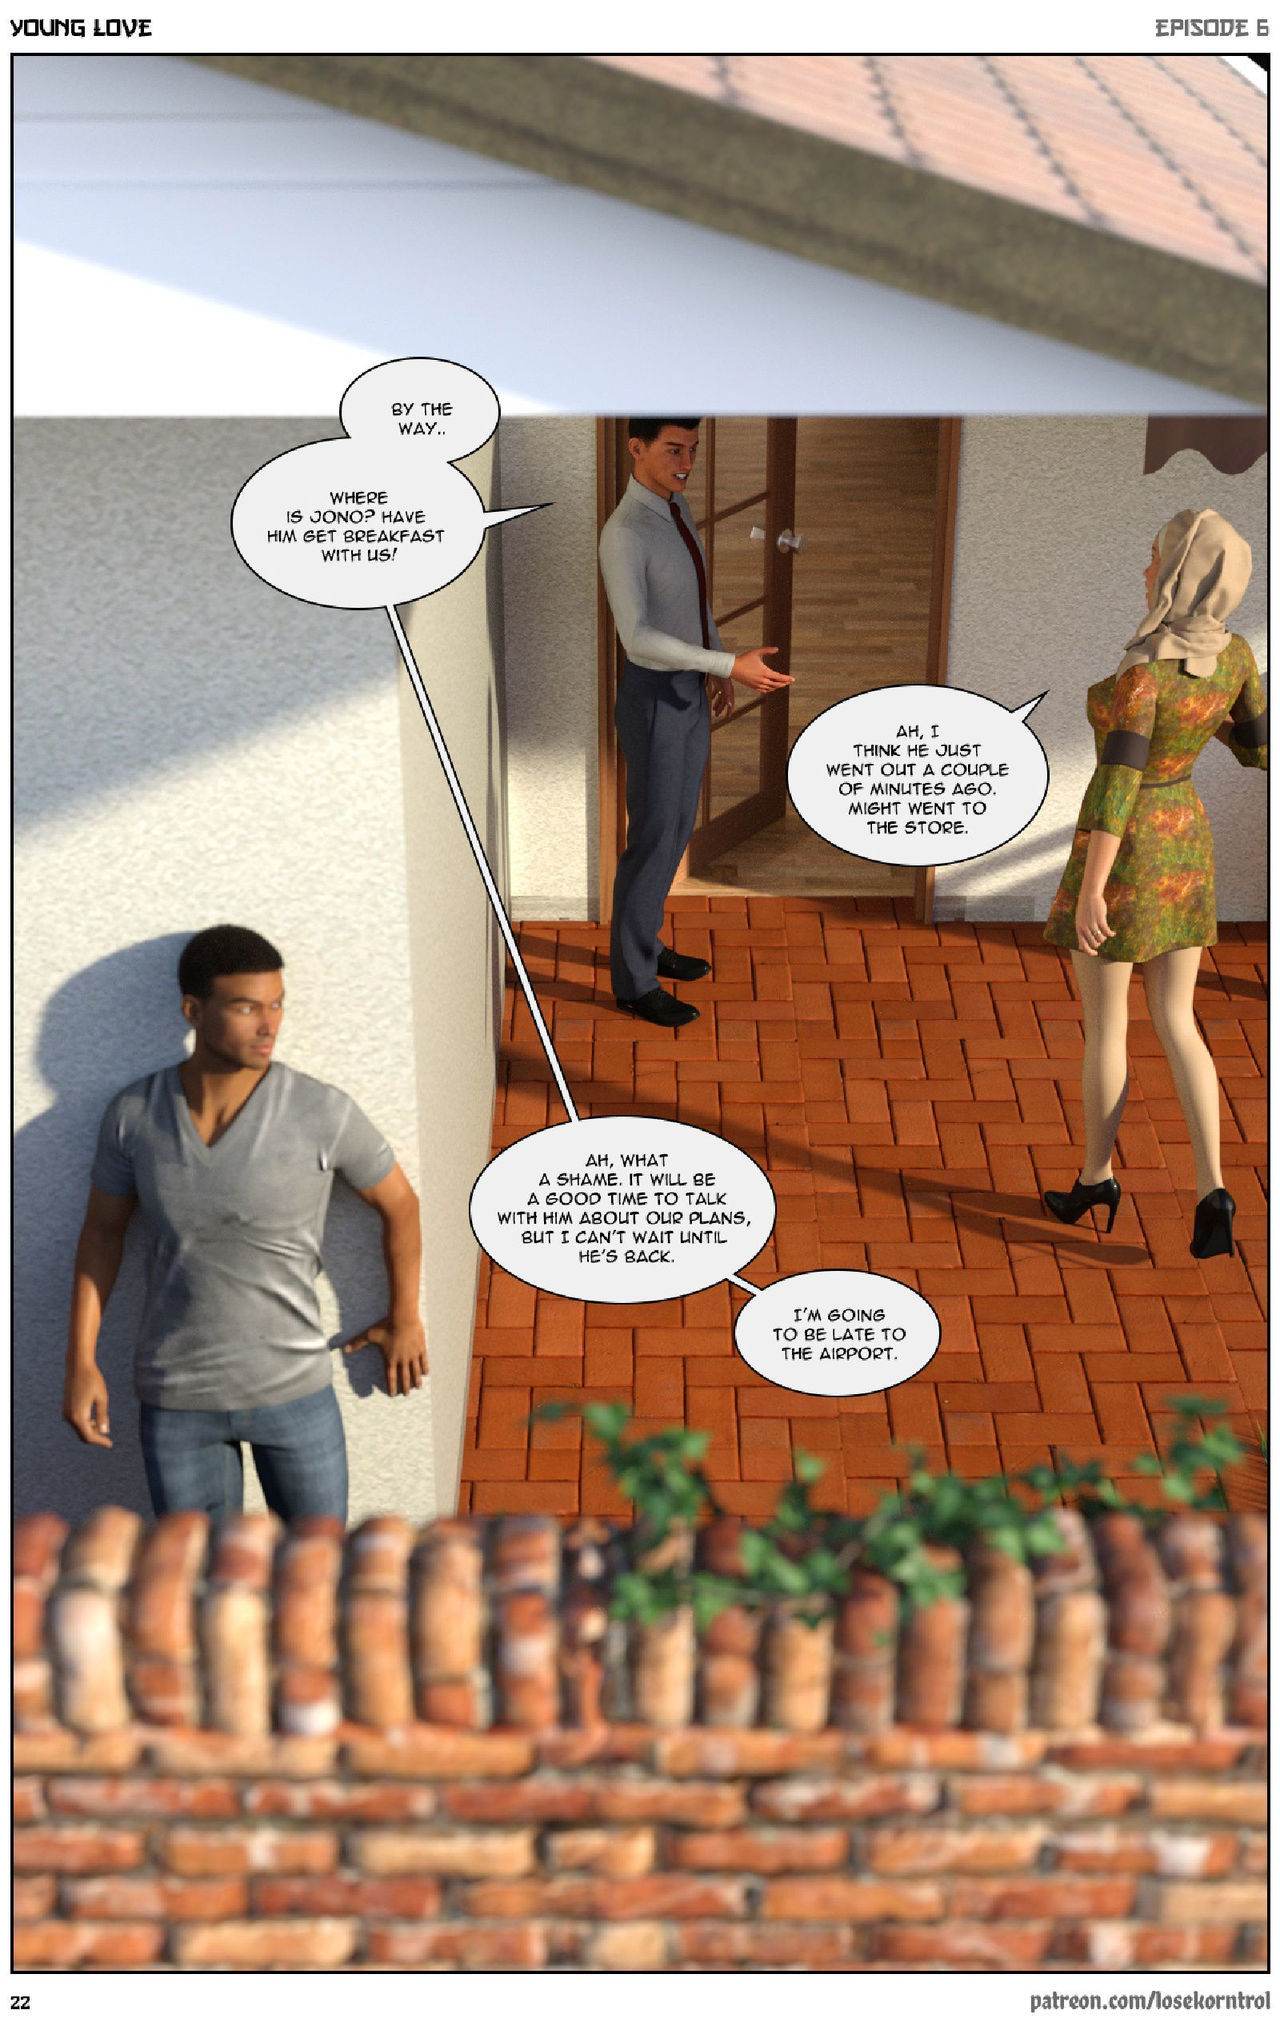 Young Love 6 - Losekorntrol page 22